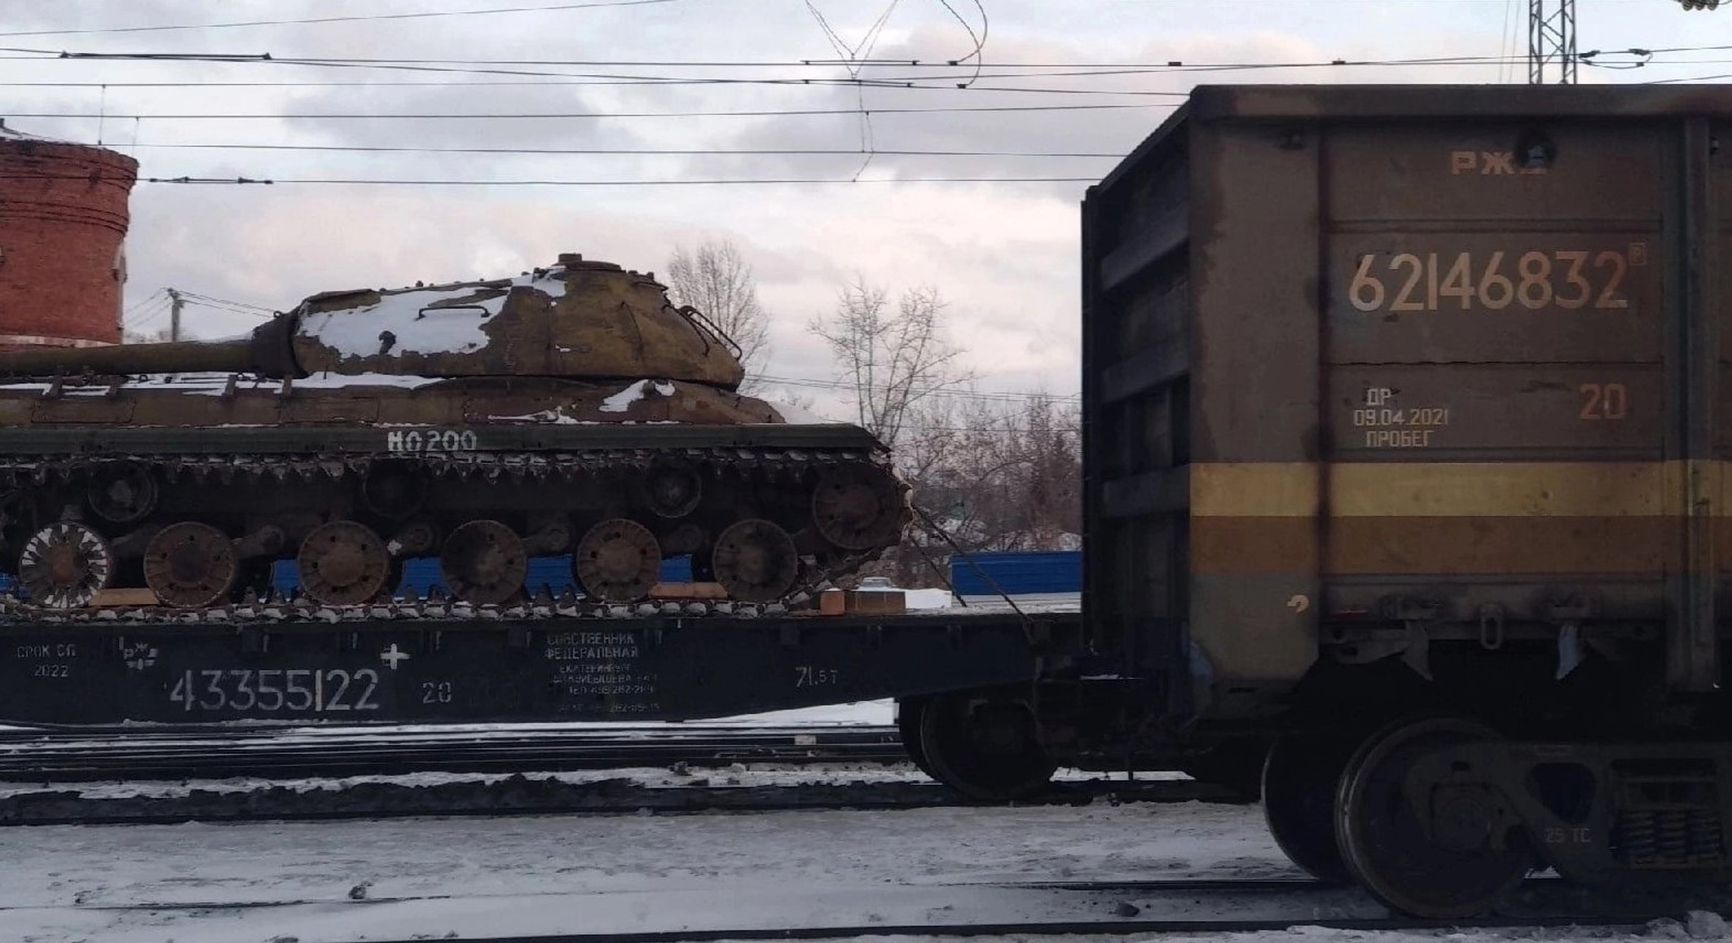 An IS-3 tank, which does not seem to be bound for Ukraine just as yet  